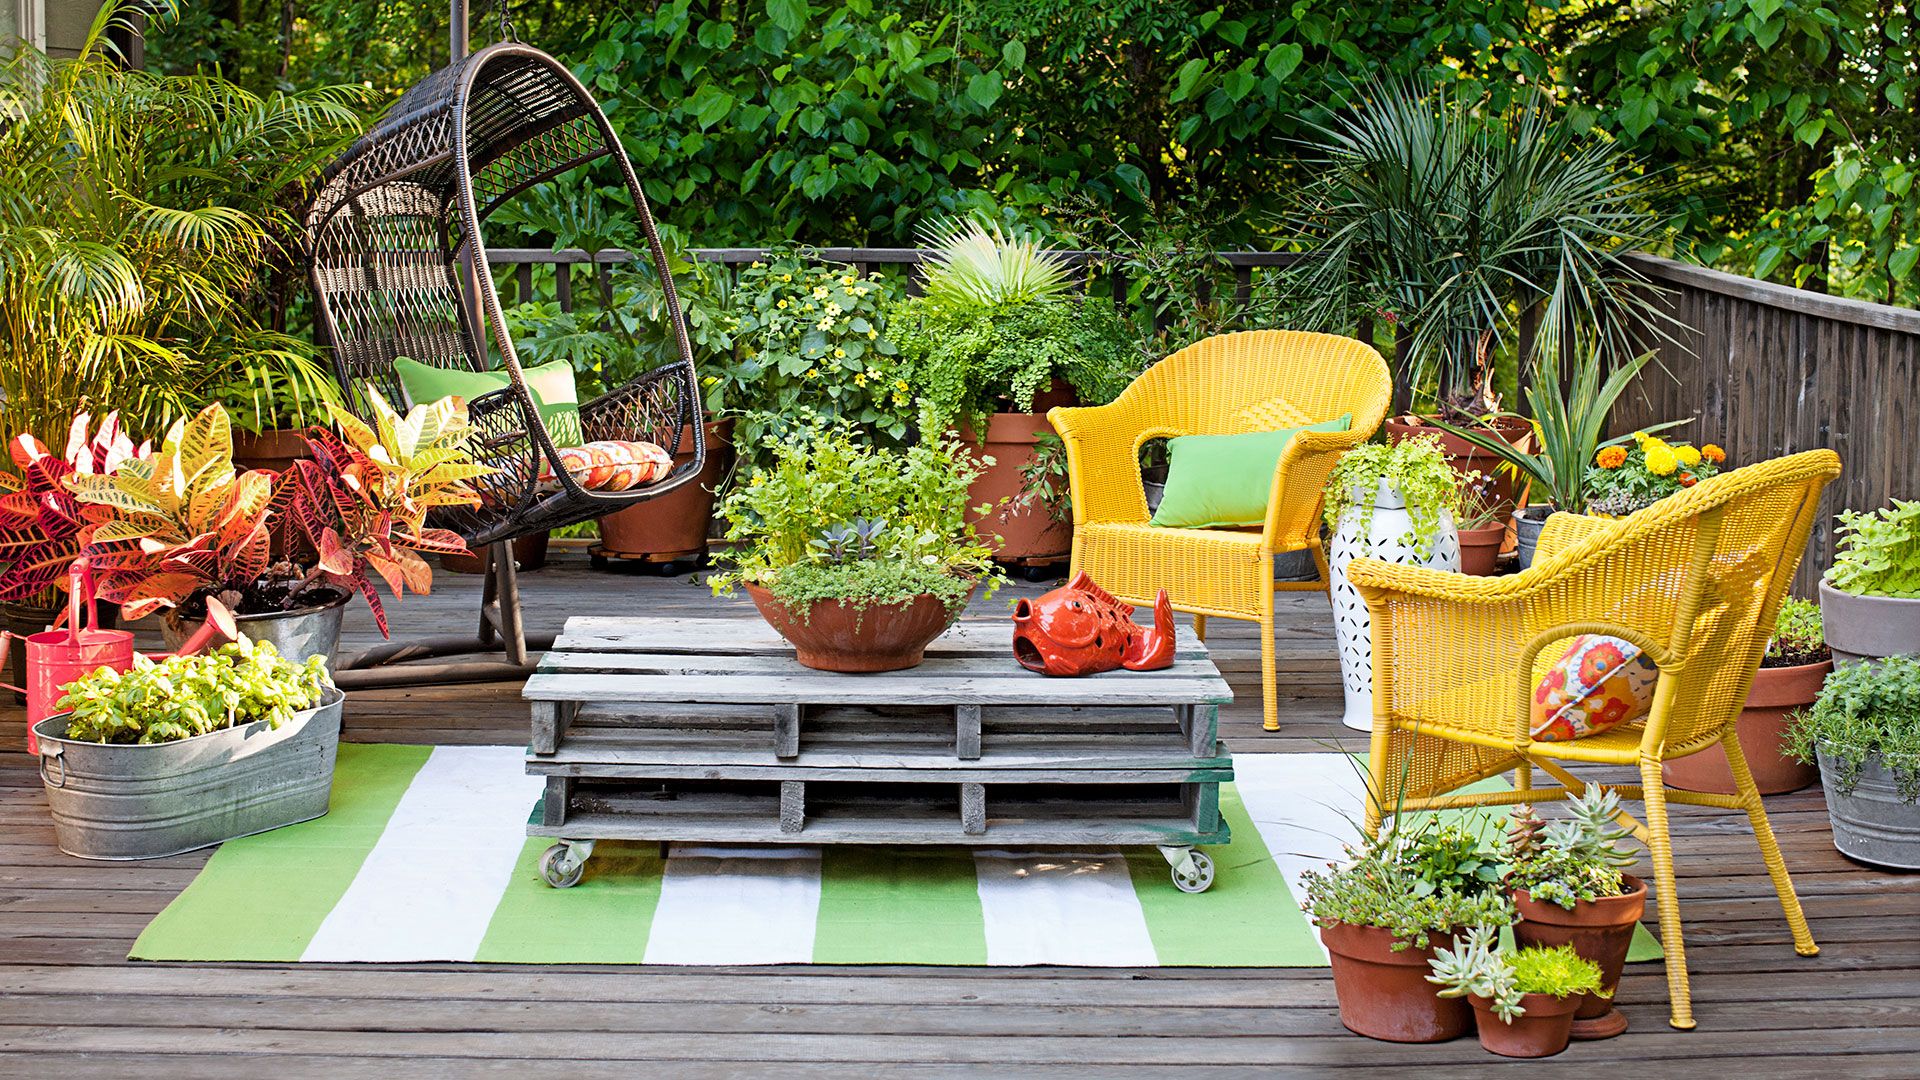 How to Decorate a Deck on a Budget